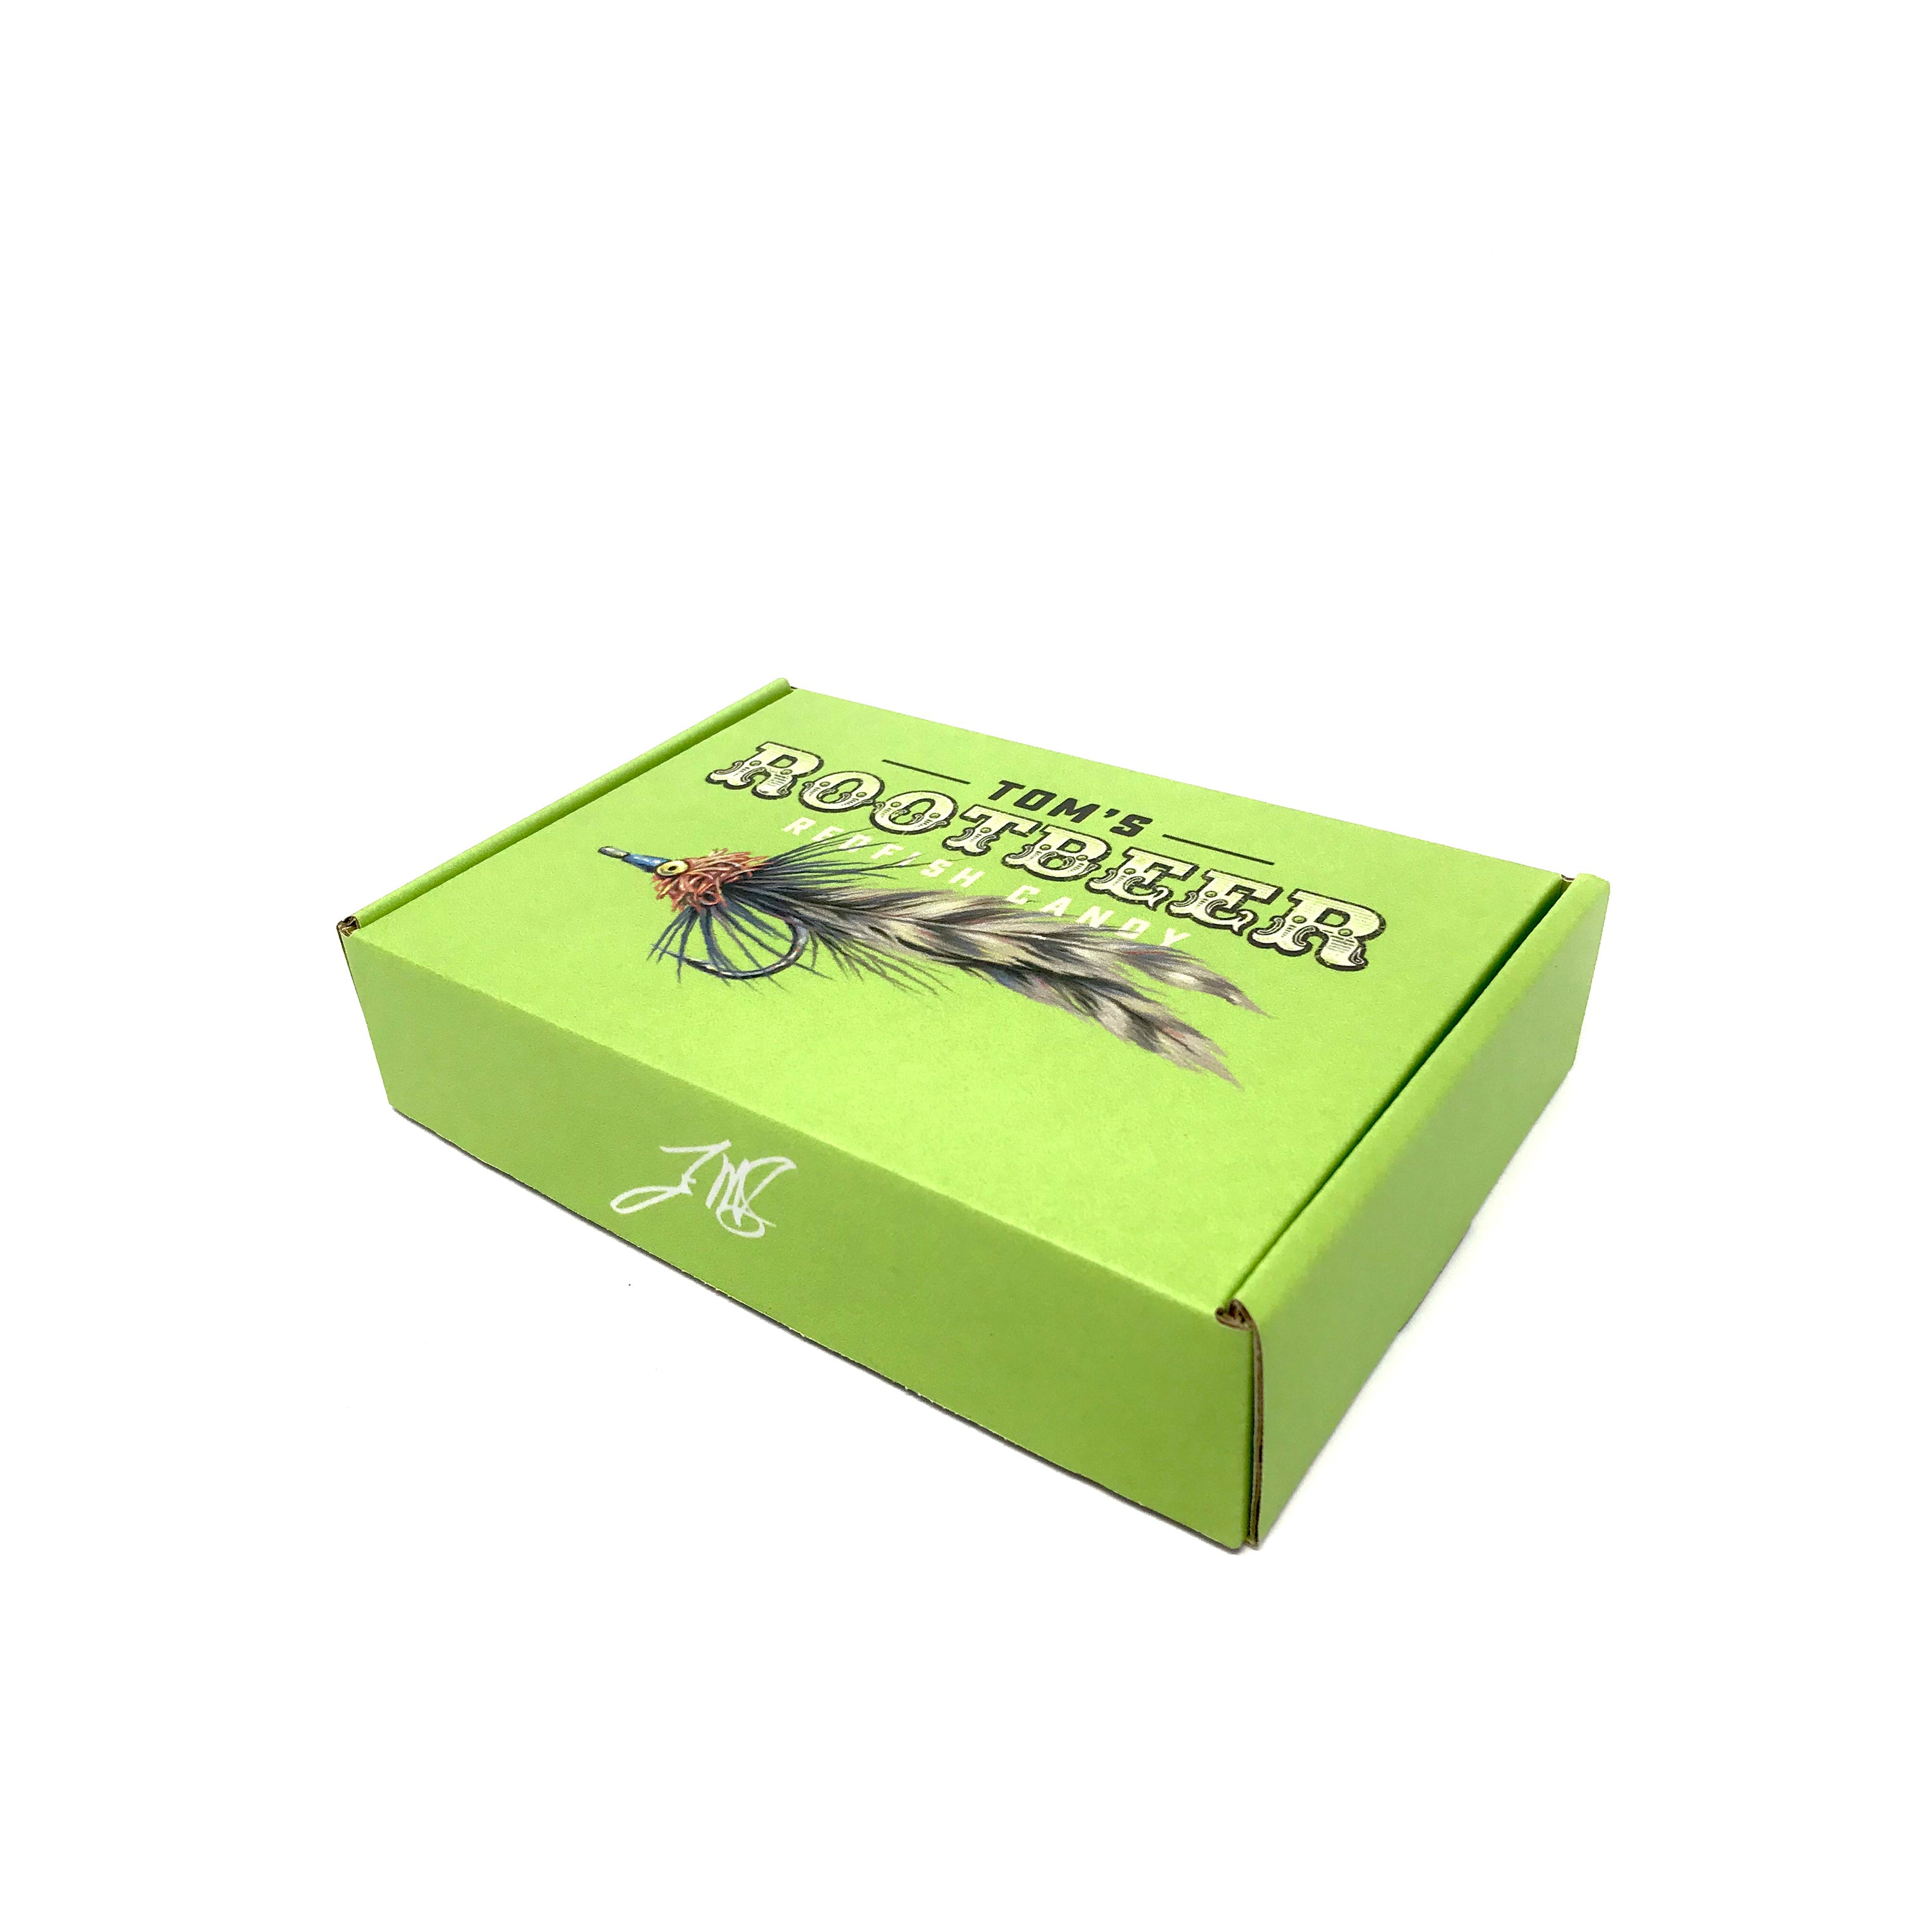 ODDSPRO Fly Fishing Flies Kit: Realistic Patterns, Handmade, 36/78Pcs  Assortment with Waterproof Box for Trout Fishing